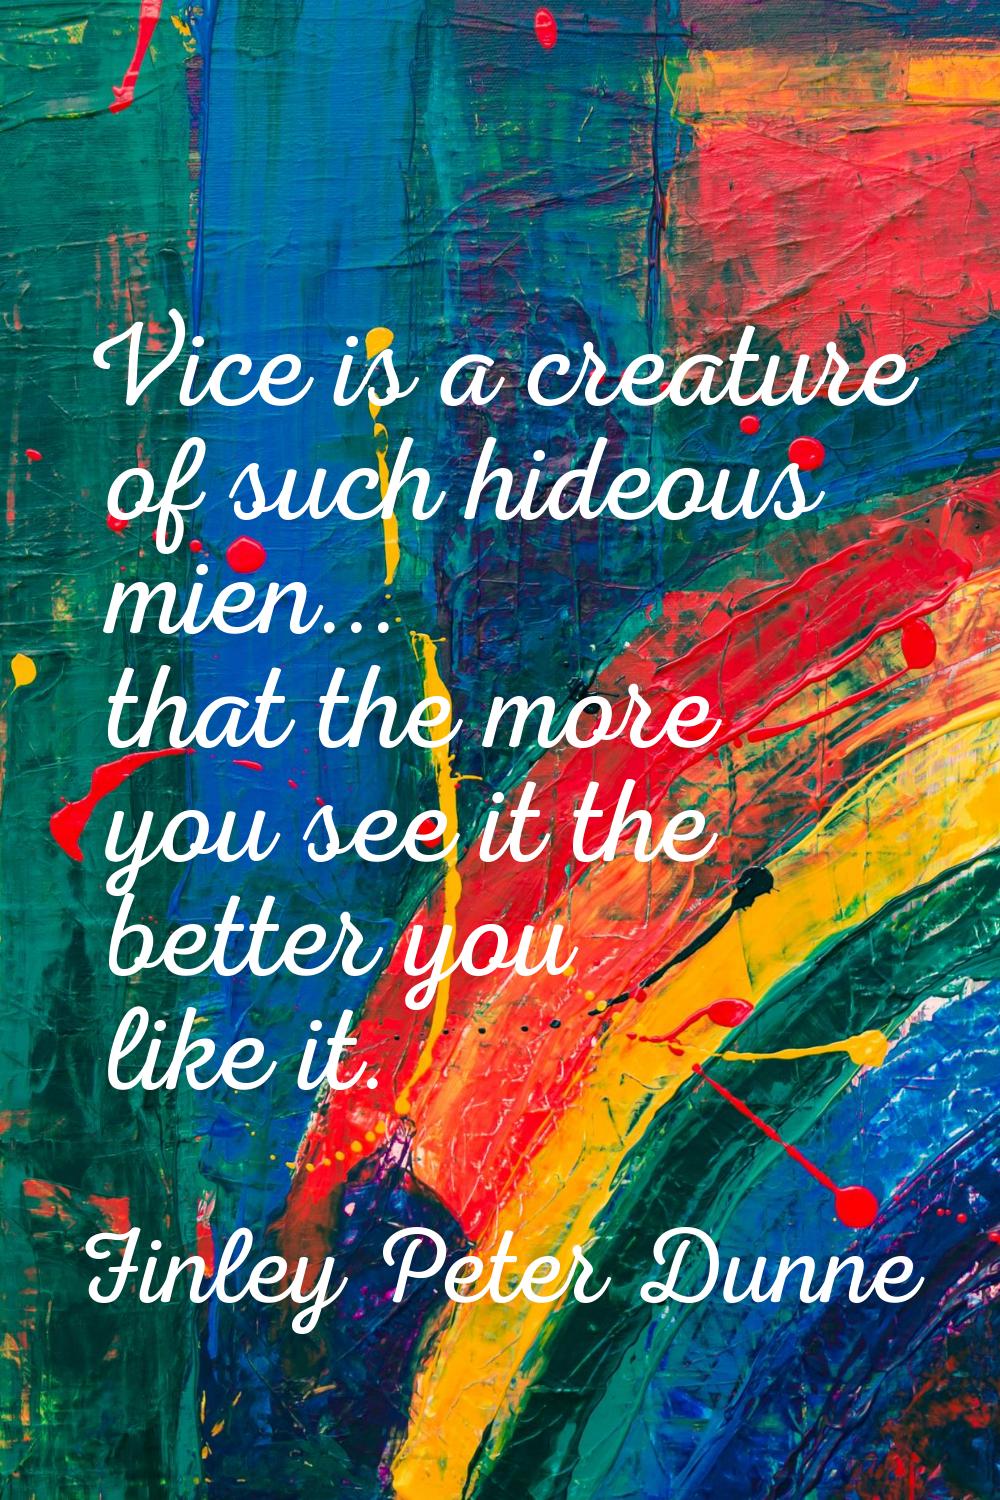 Vice is a creature of such hideous mien... that the more you see it the better you like it.